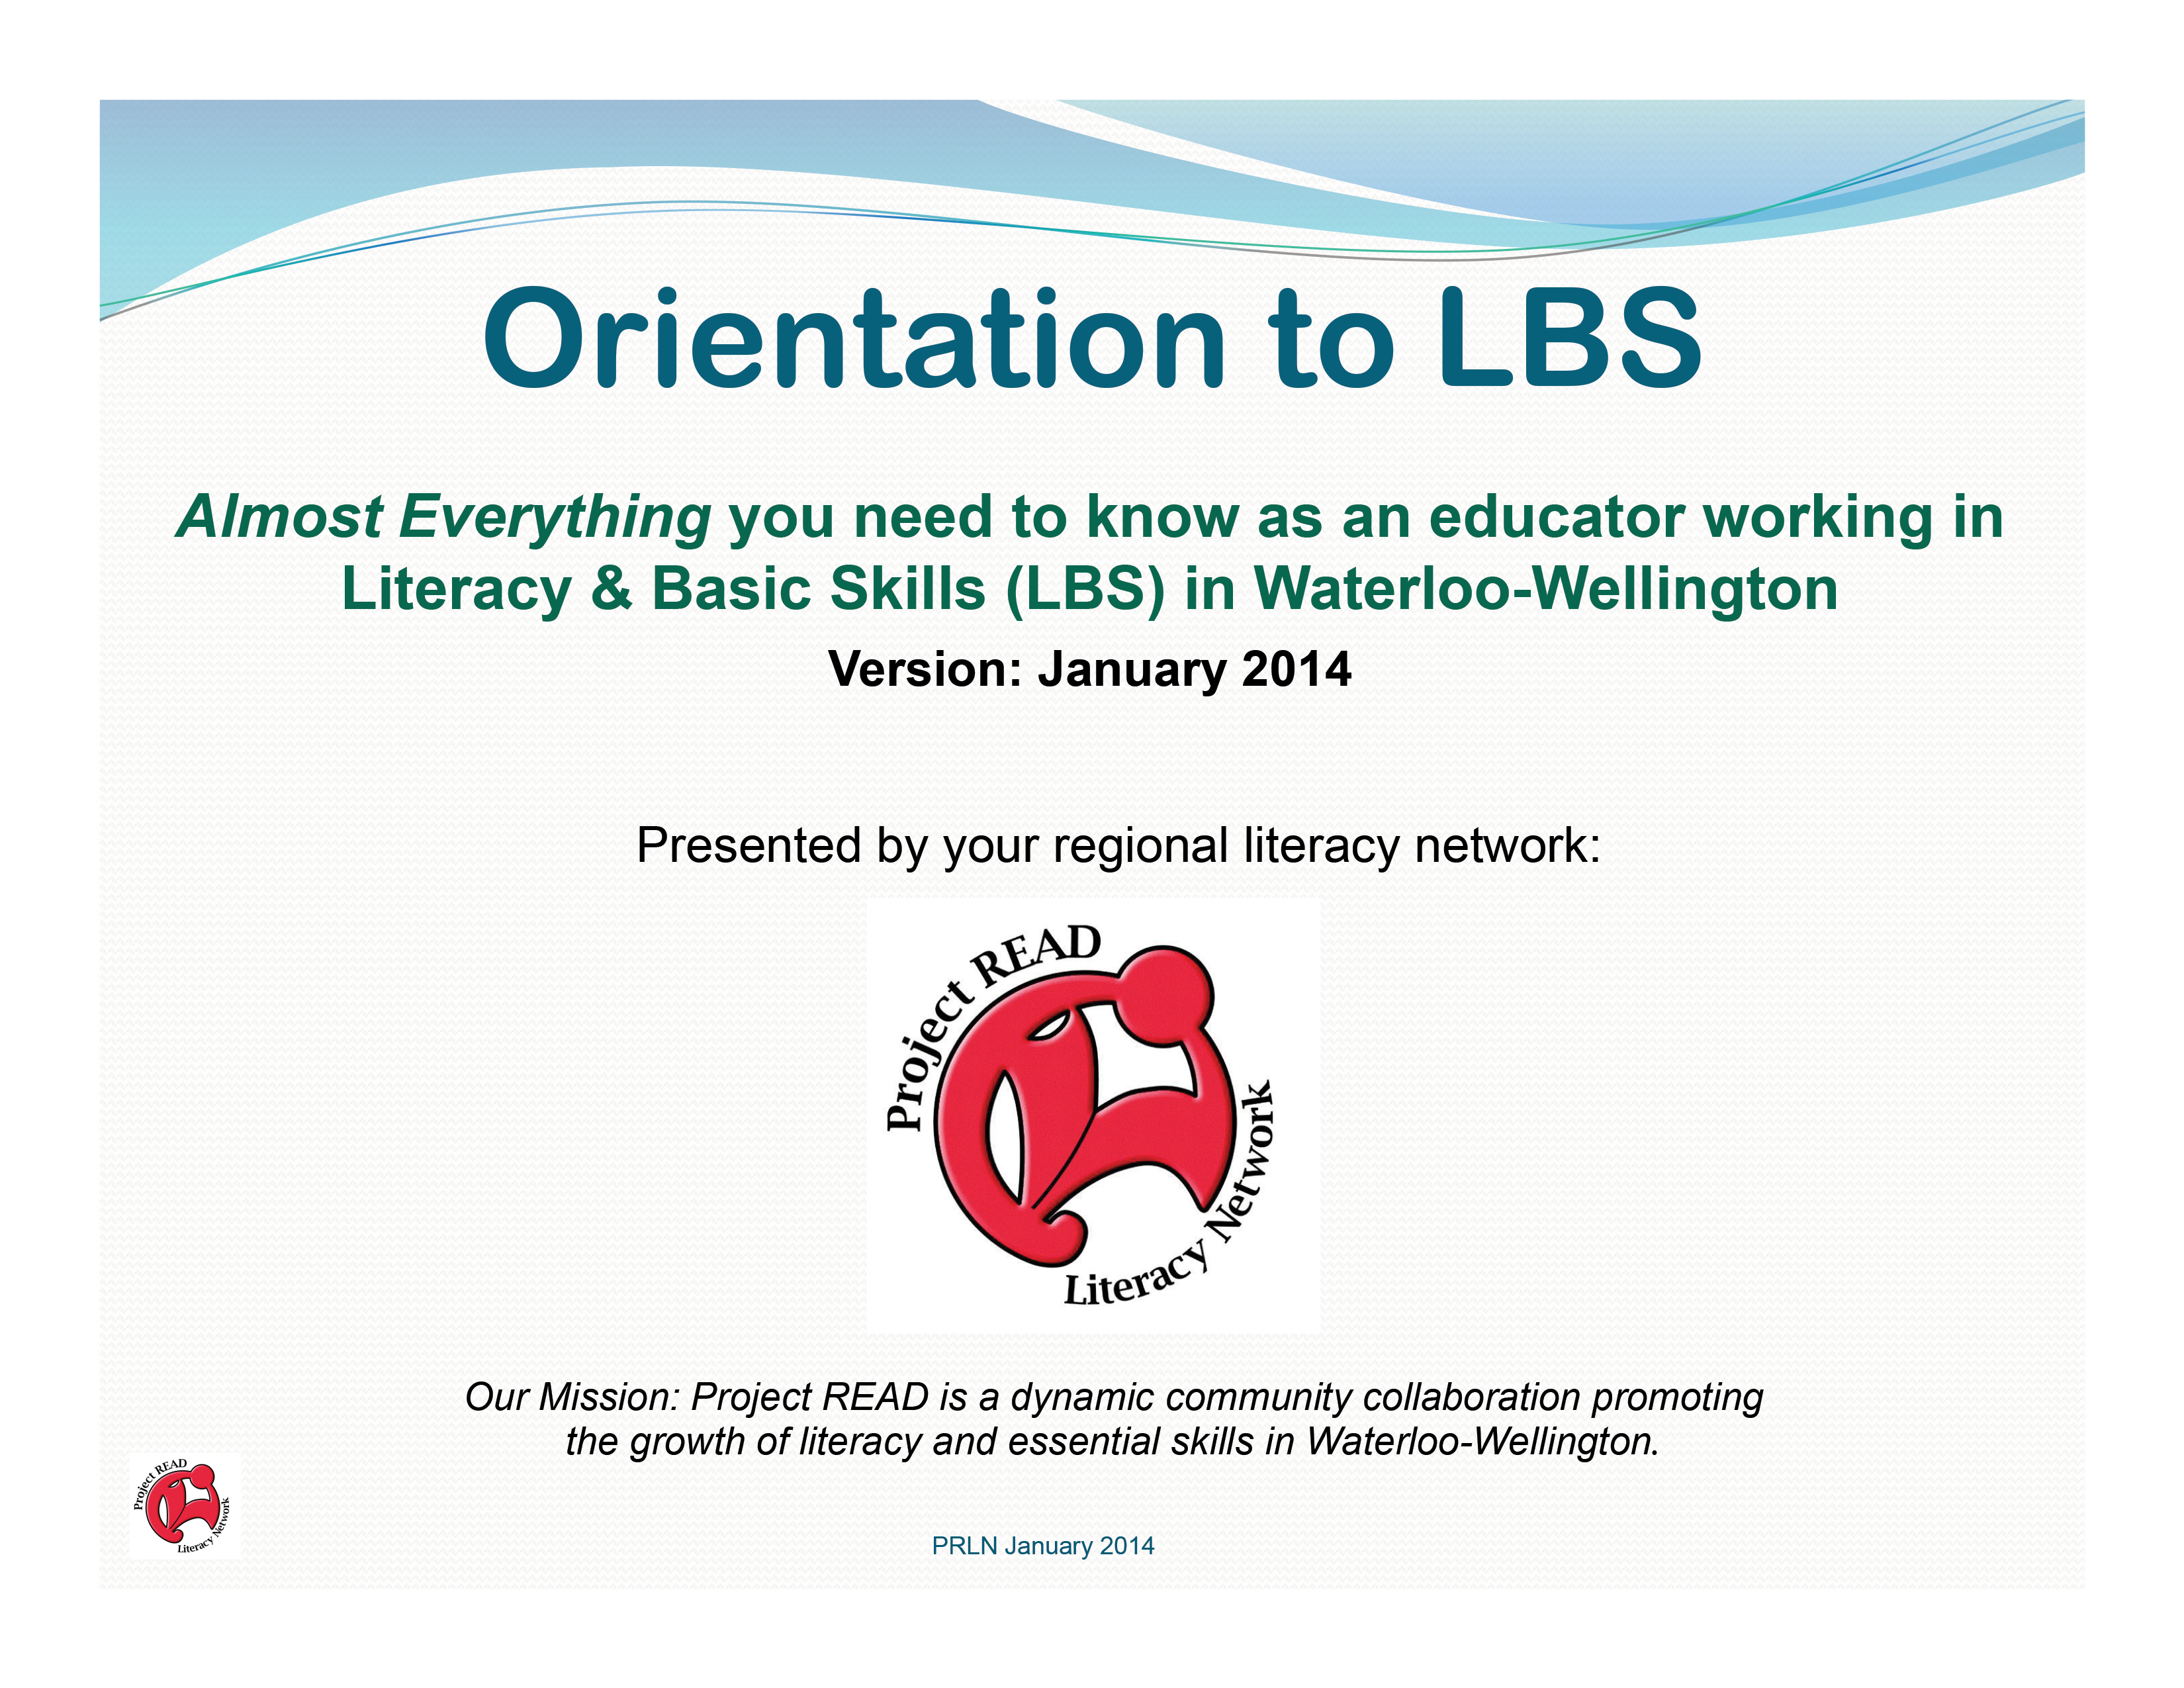 Orientation to LBS Almost Everything You Need to Know as a Practitioner Working in Literacy & Basic Skills (LBS) in Waterloo-Wellington (January 2014 Version)